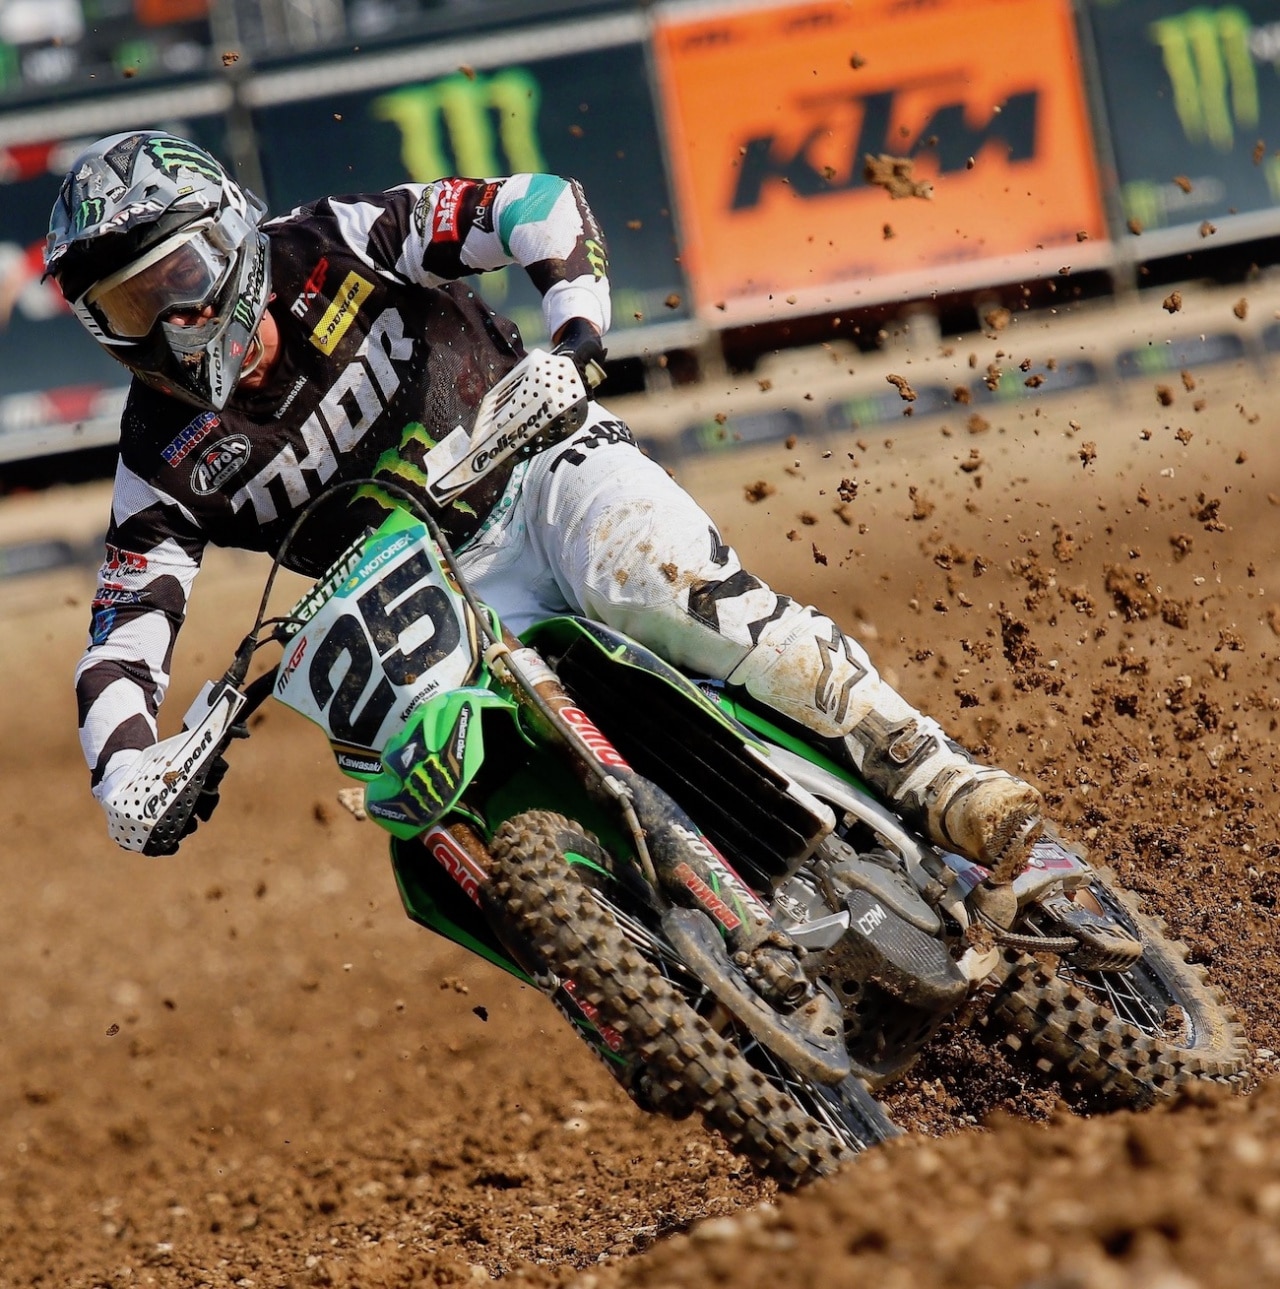 KAWASAKI EUROPE ANNOUNCES THAT HAVE RE-SIGNED CLEMENT DESALLE FOR 2020 - Motocross Action Magazine